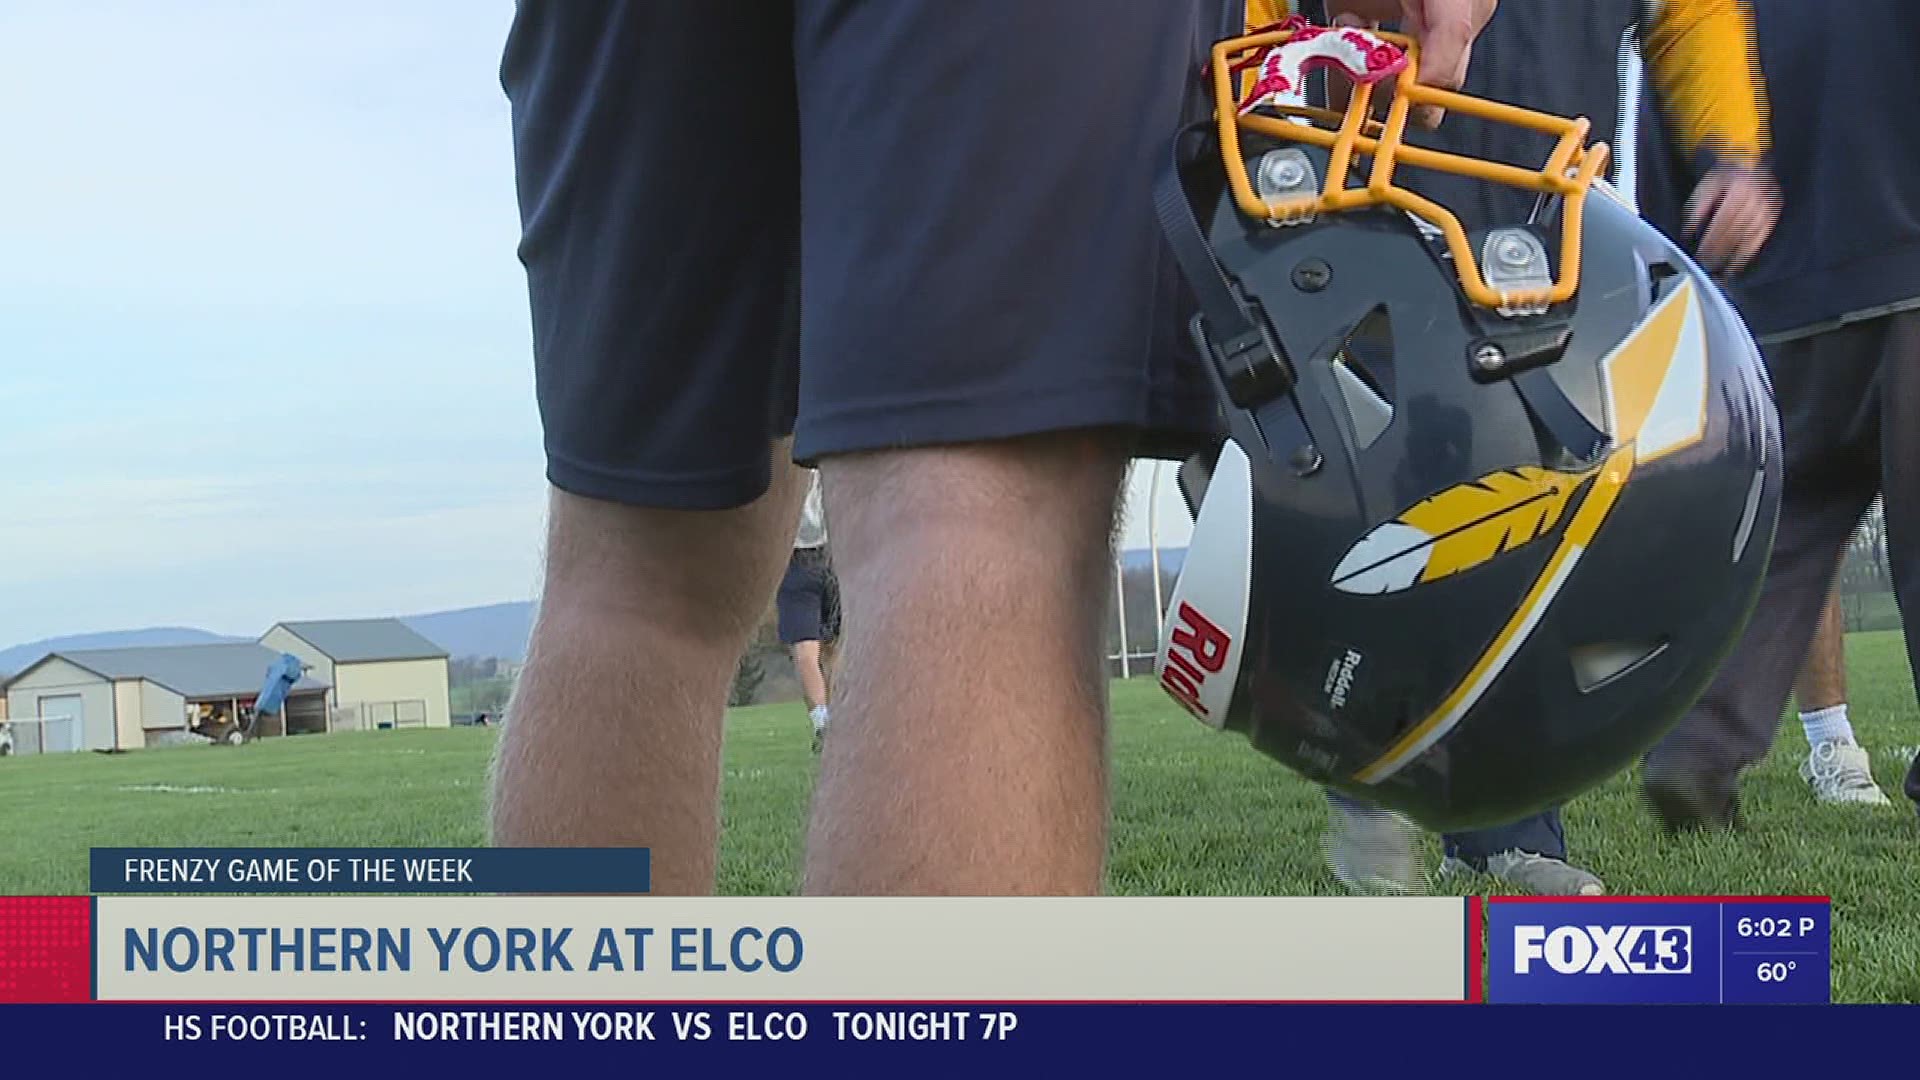 HSFF Game of the Week Preview: Northern York at ELCO